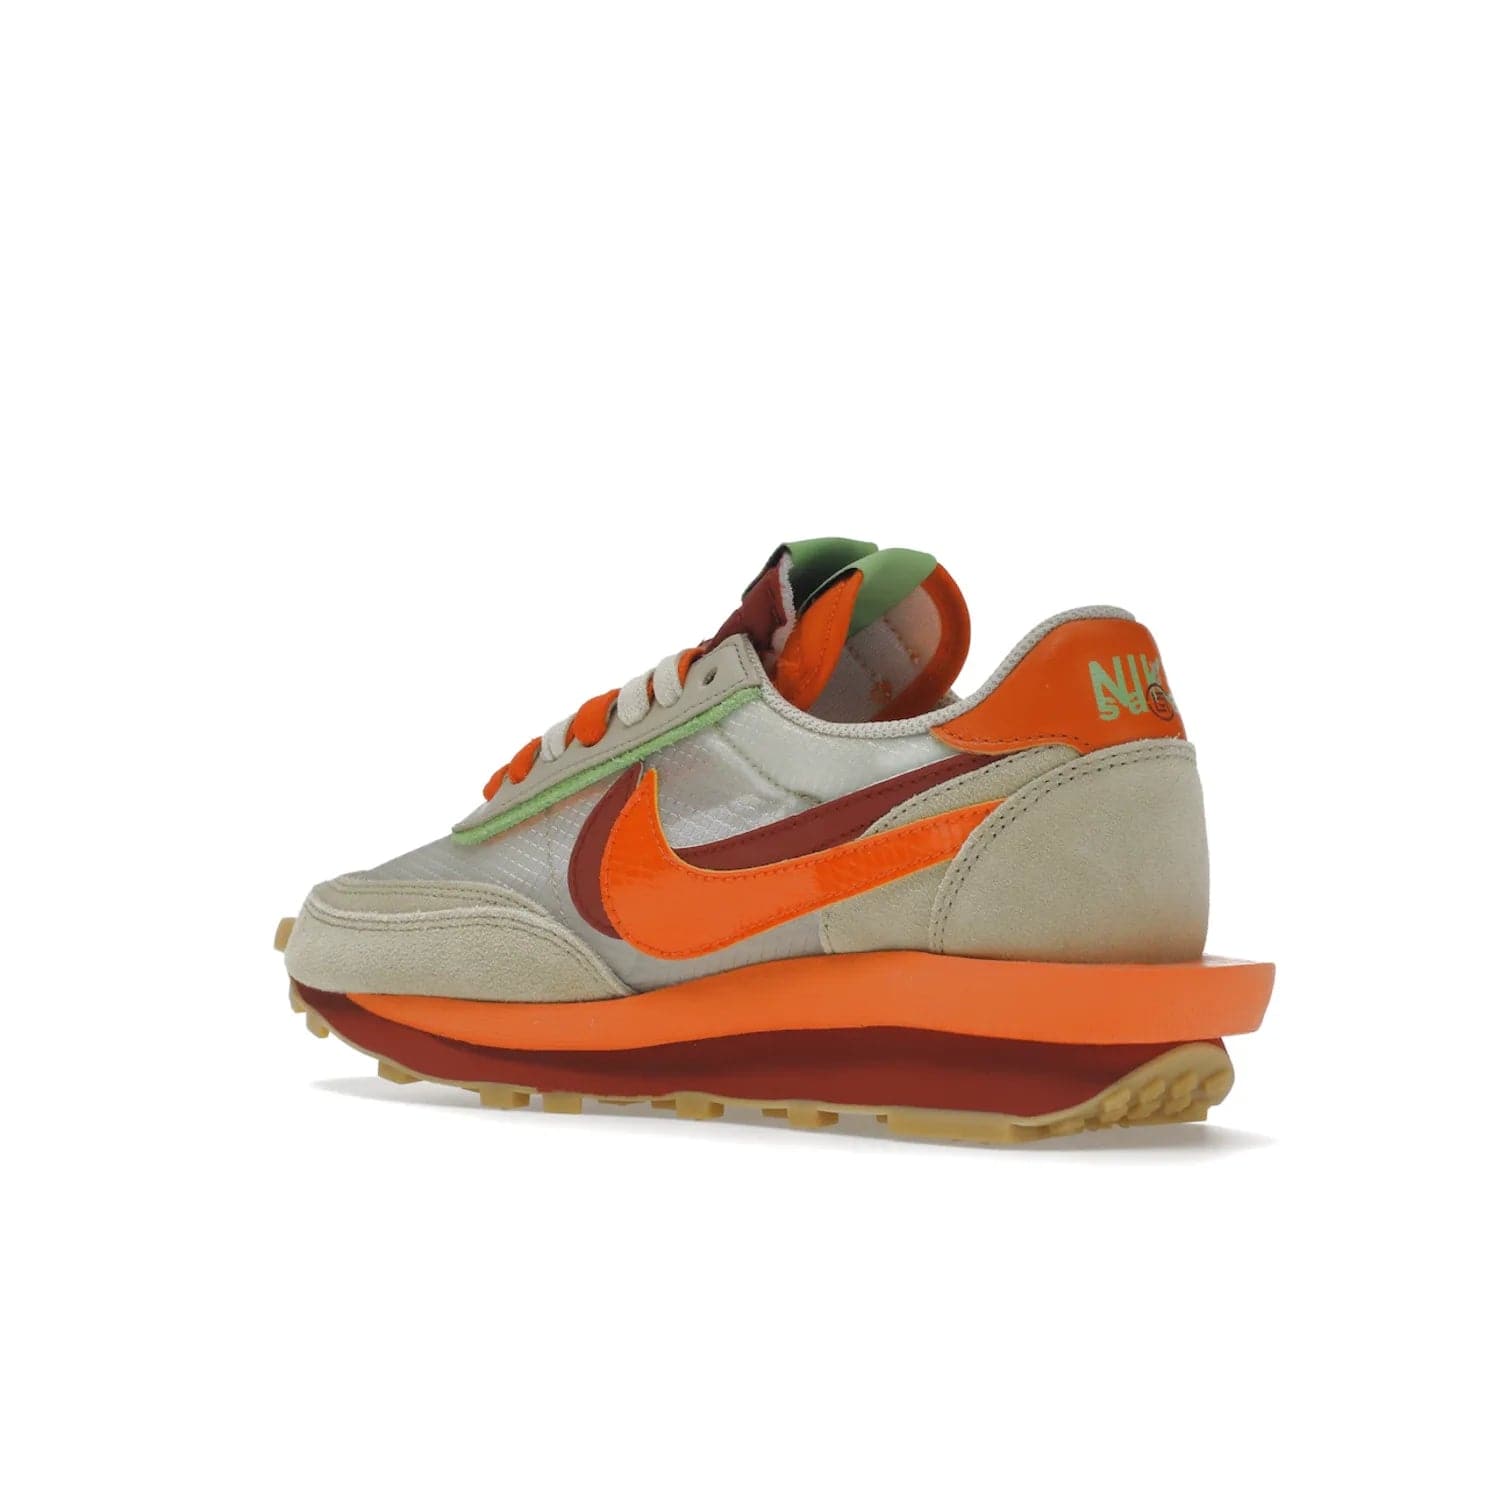 Nike LD Waffle sacai CLOT Kiss of Death Net Orange Blaze - Image 23 - Only at www.BallersClubKickz.com - A bold and stylish Nike LD Waffle sacai CLOT Kiss of Death Net Orange Blaze sneaker featuring a unique off-white, Deep Red & Orange Blaze Swooshes, two-toned stacked sole and doubled tongue. Available in September 2021. Make a statement.